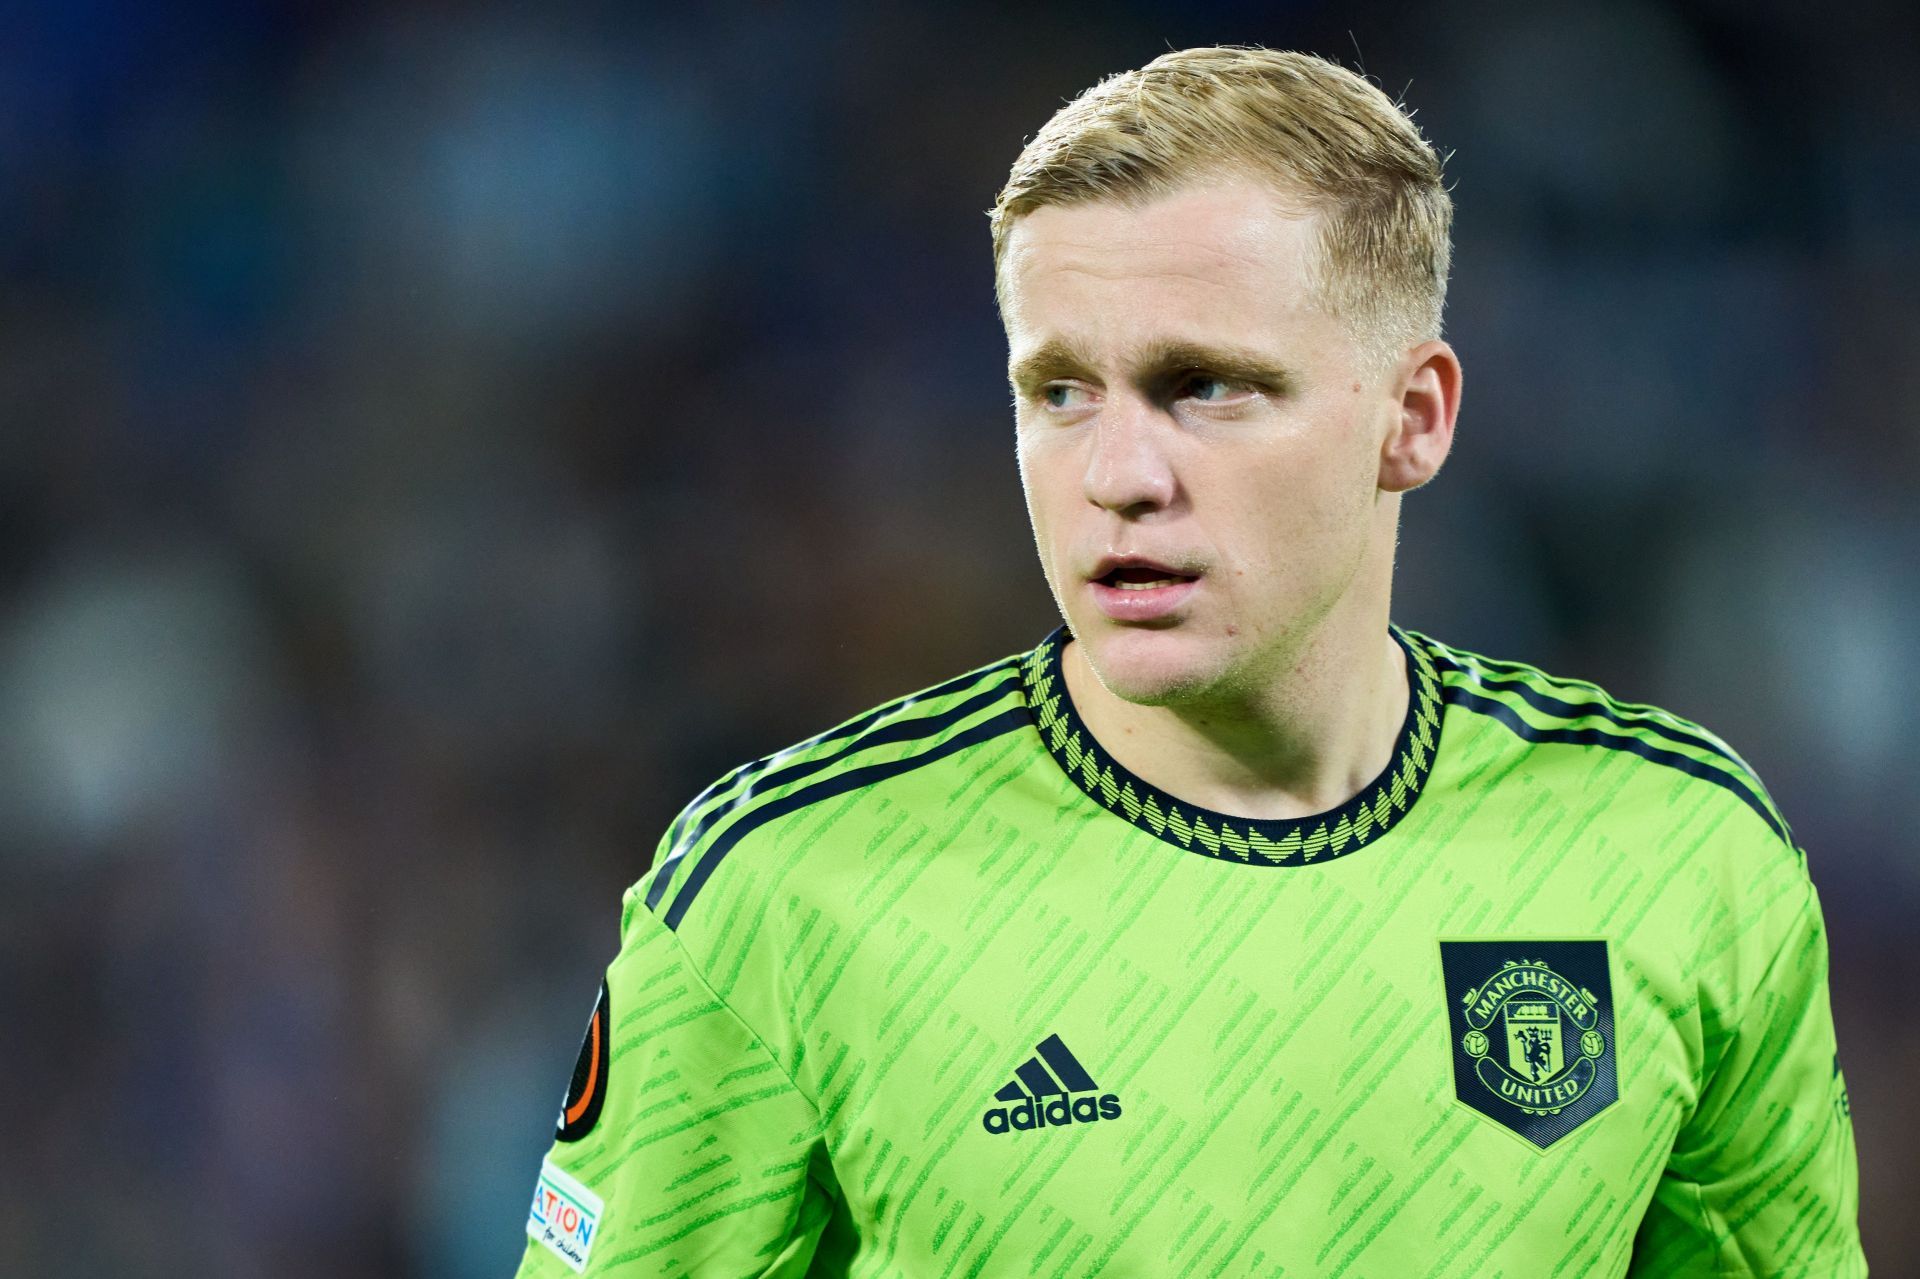 Van De Beek has had a terrible time at Manchester and the Dutchman must leave if he hopes to reinvigorate his flagging career